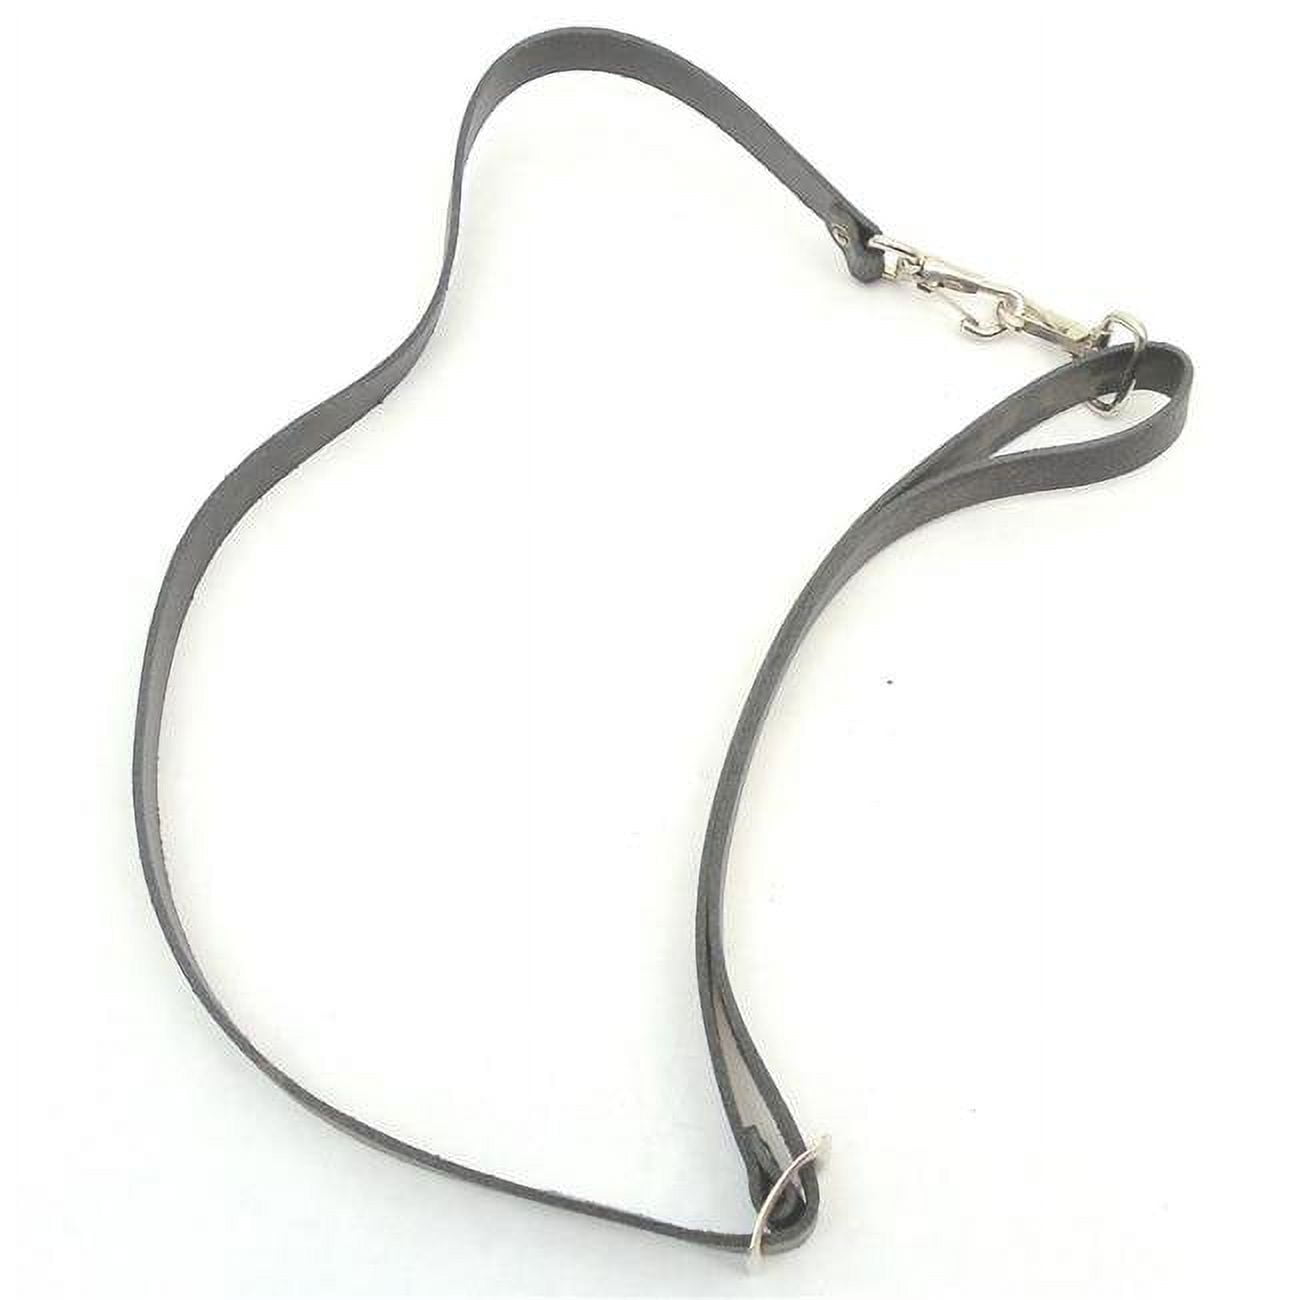 Picture of AW LS200 4 ft. Adjustable Heavy Duty 3 by 4 in., Wide Leather Strap with A Strudy Hook On Each End - Black